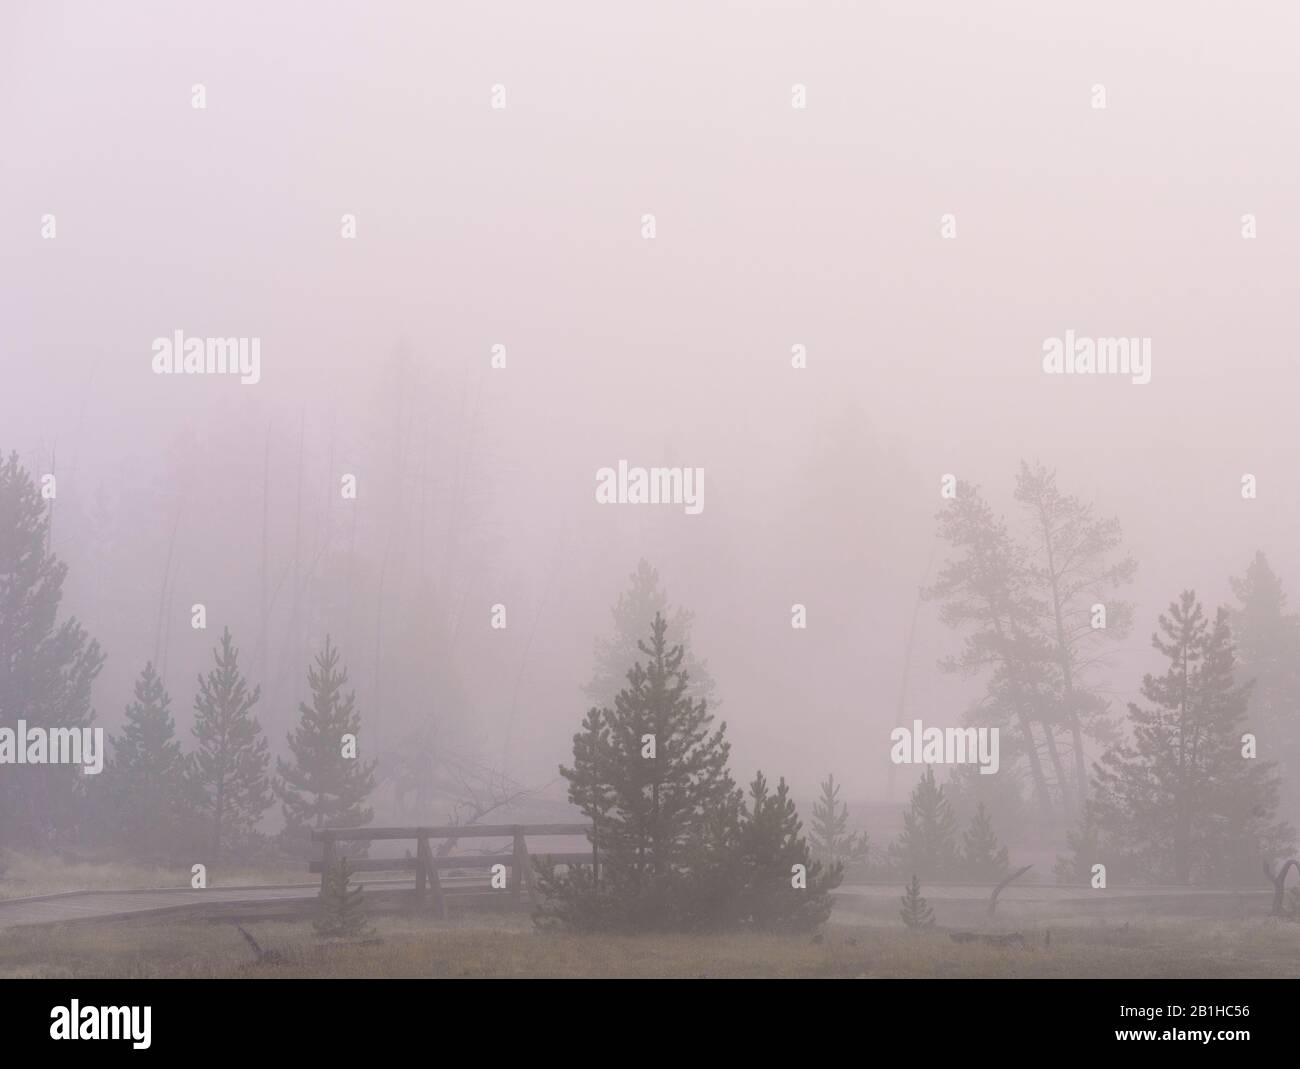 Pine trees and wood fence in dense morning fog. Stock Photo